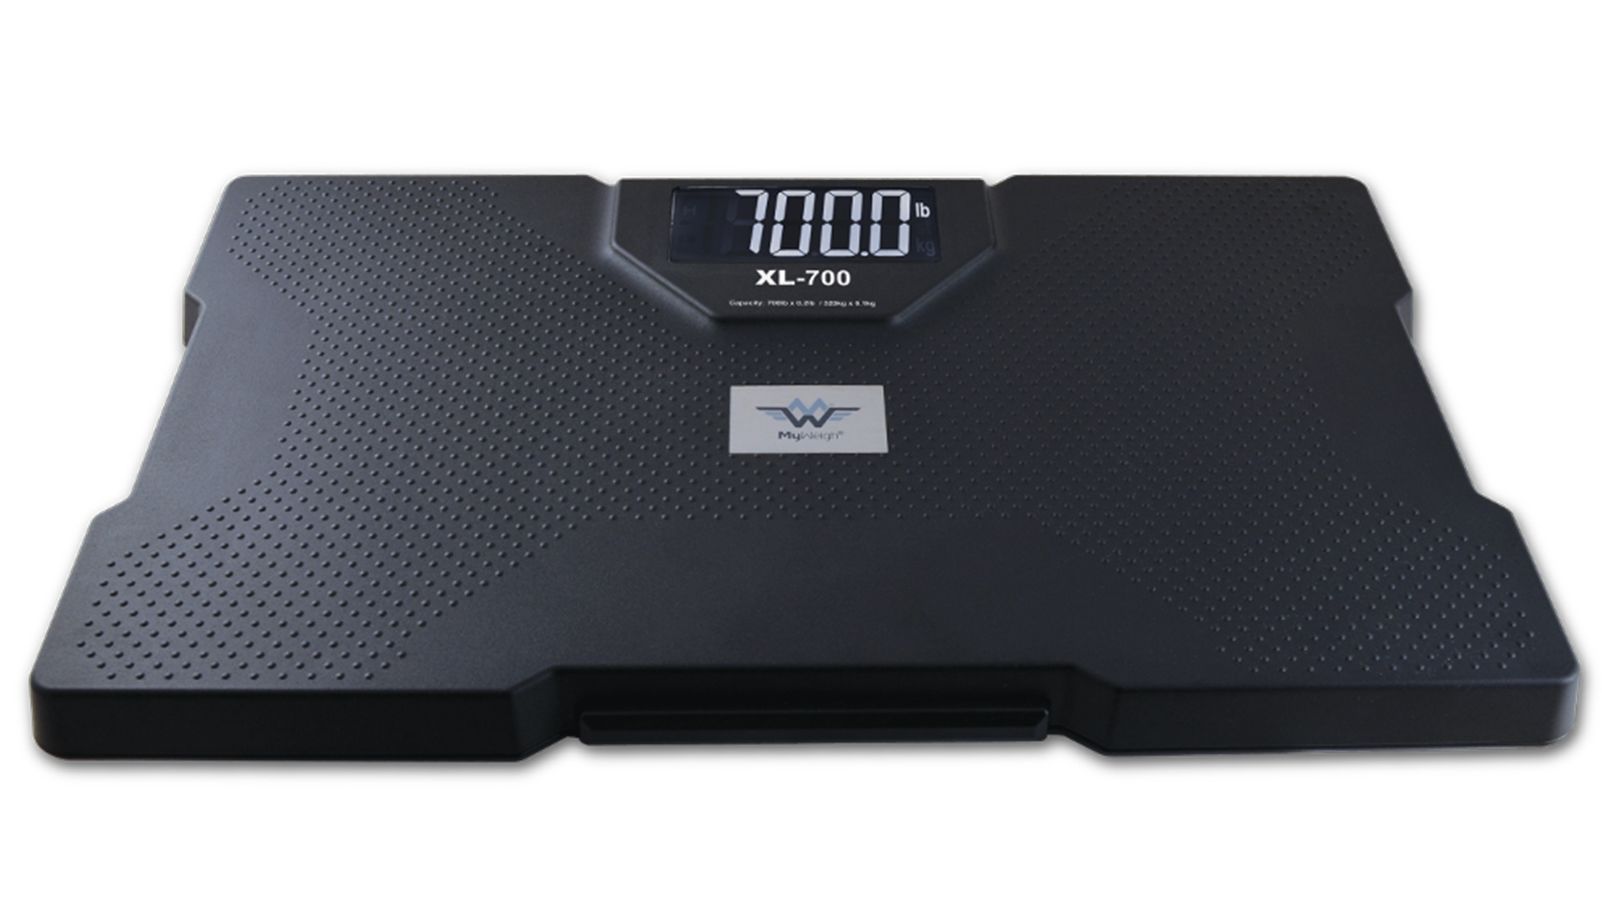 Gadget Daddy: The modest bathroom scale has gone upscale